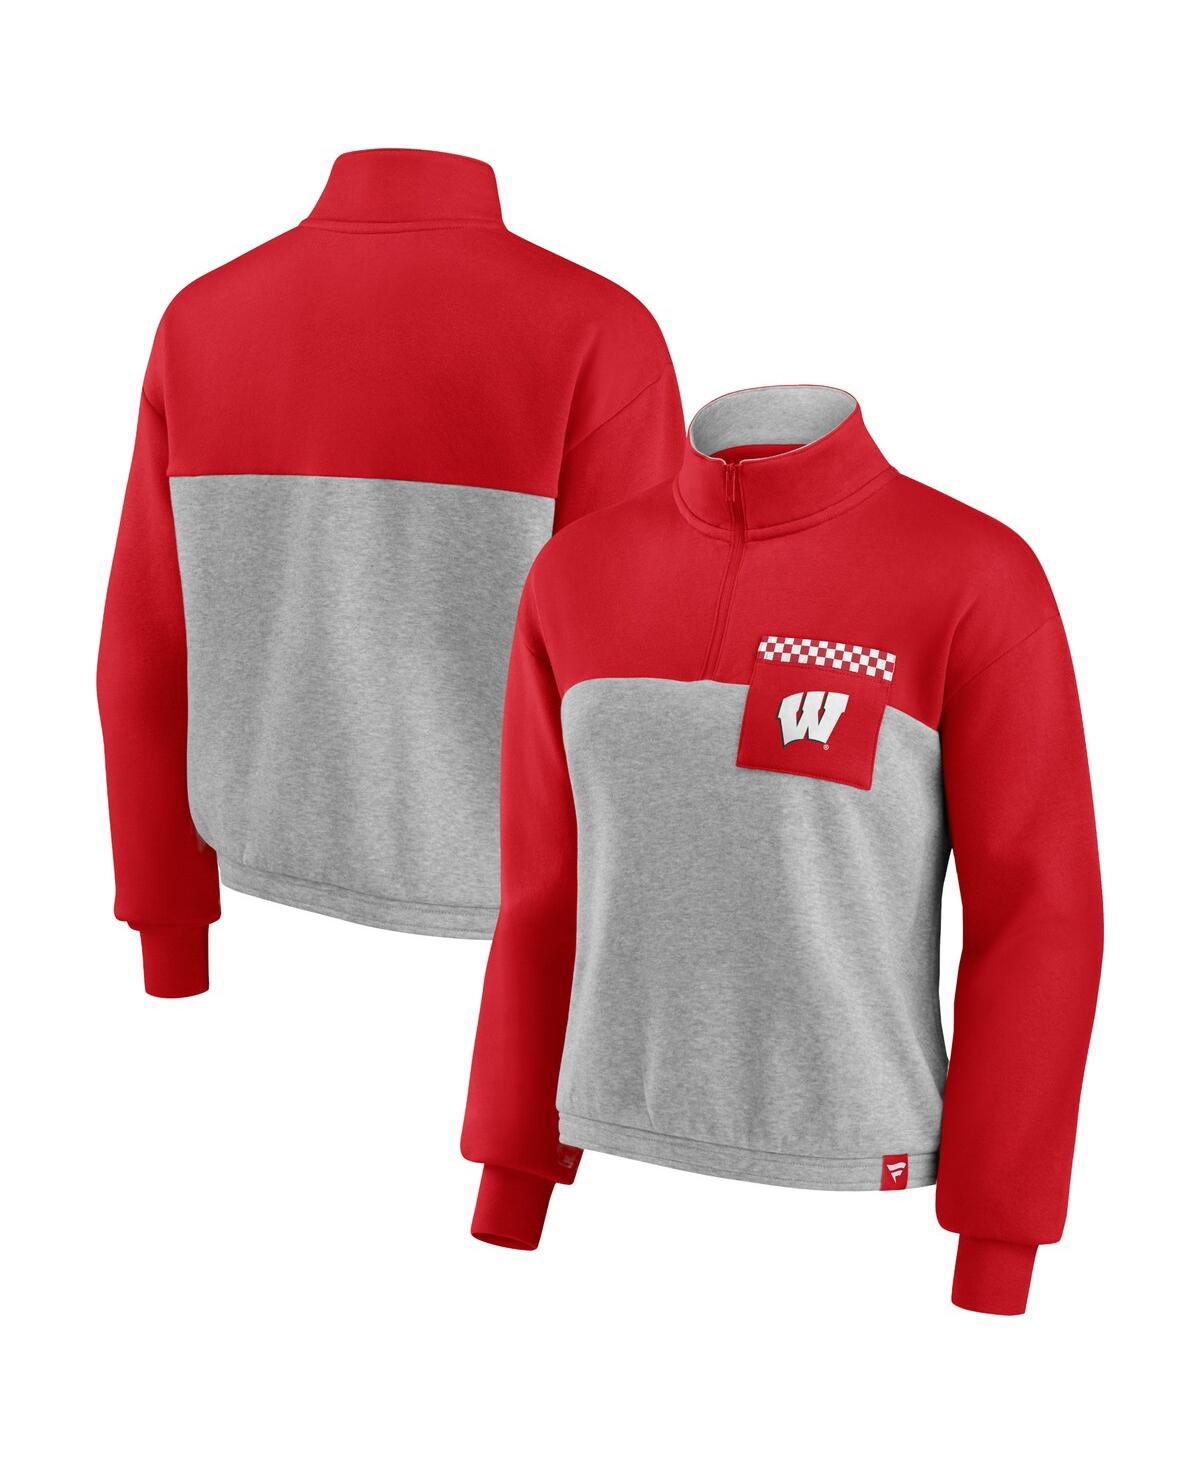 Women's Fanatics Red, Heathered Gray Wisconsin Badgers Sideline to Sideline Colorblock Quarter-Zip Jacket - Red, Heathered Gray